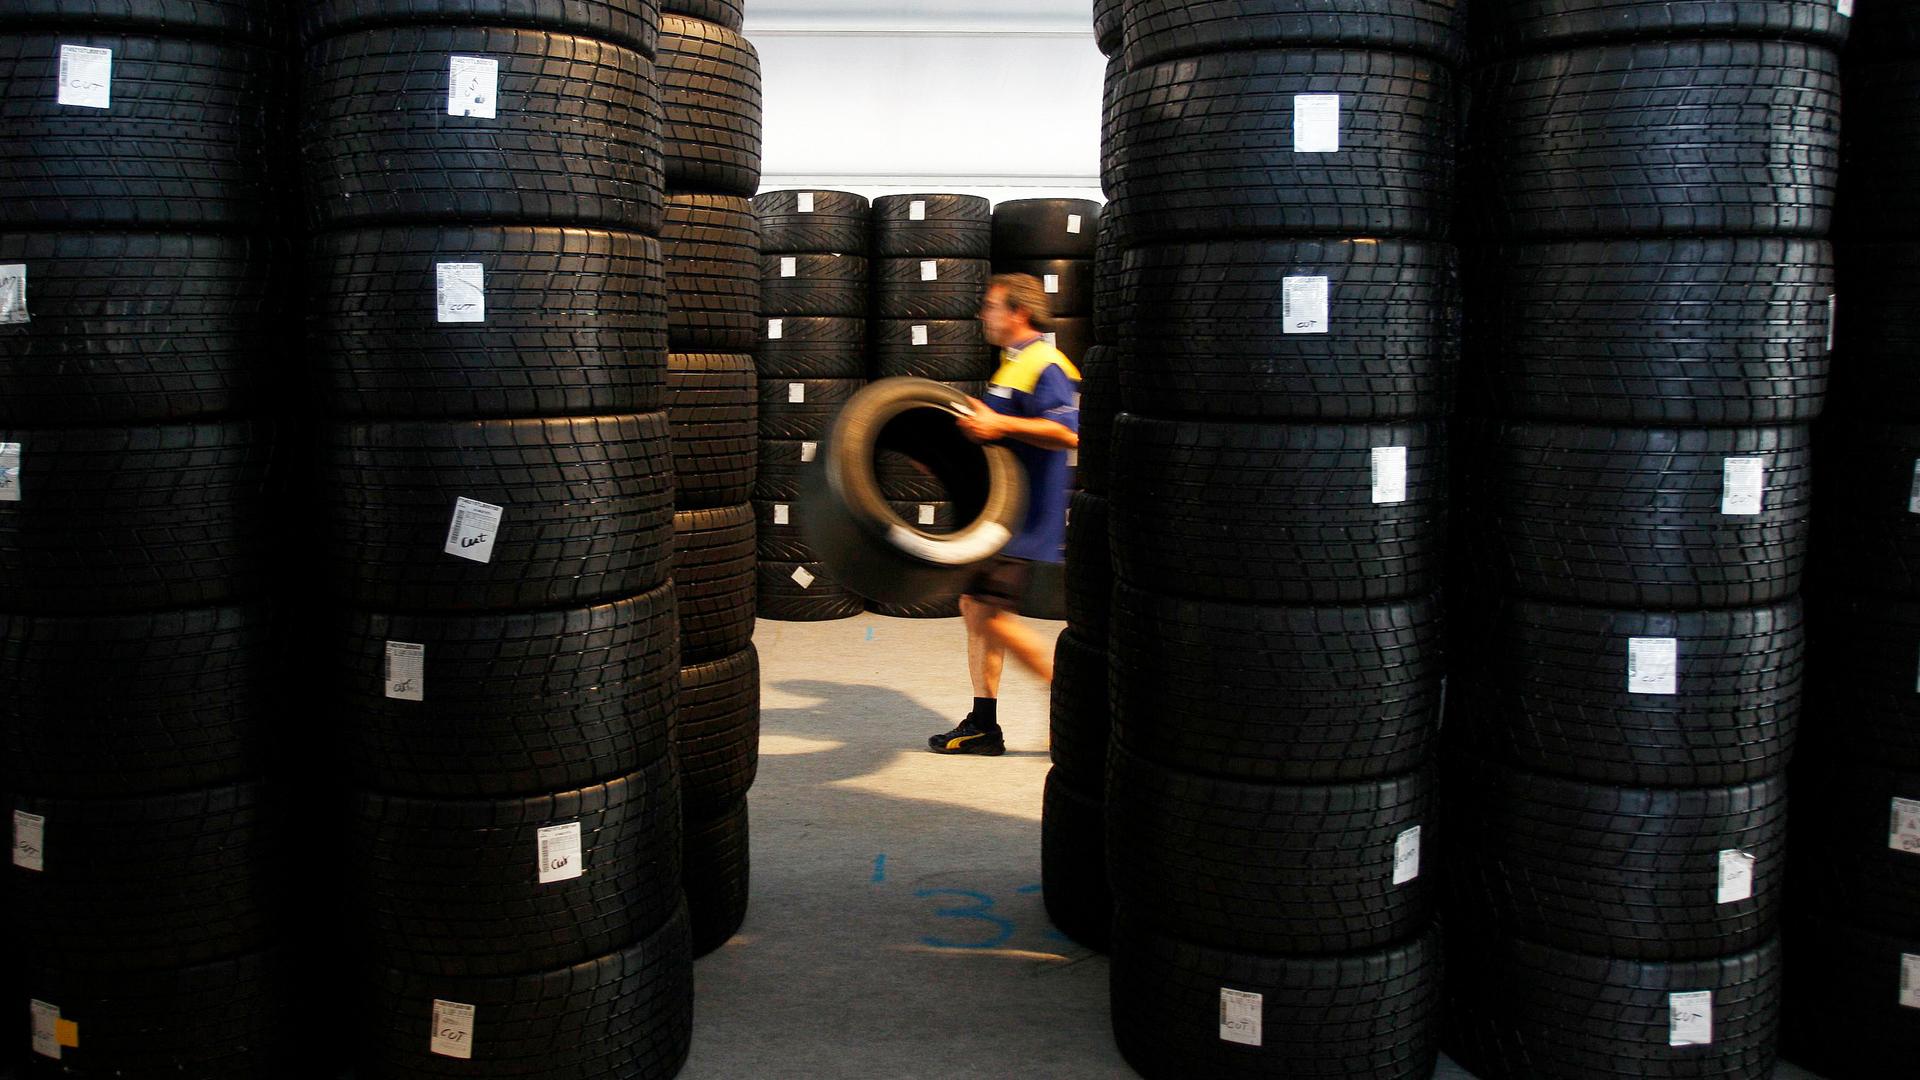 Michelin is committing to "responsible and sustainable management of natural rubber" for its tires.